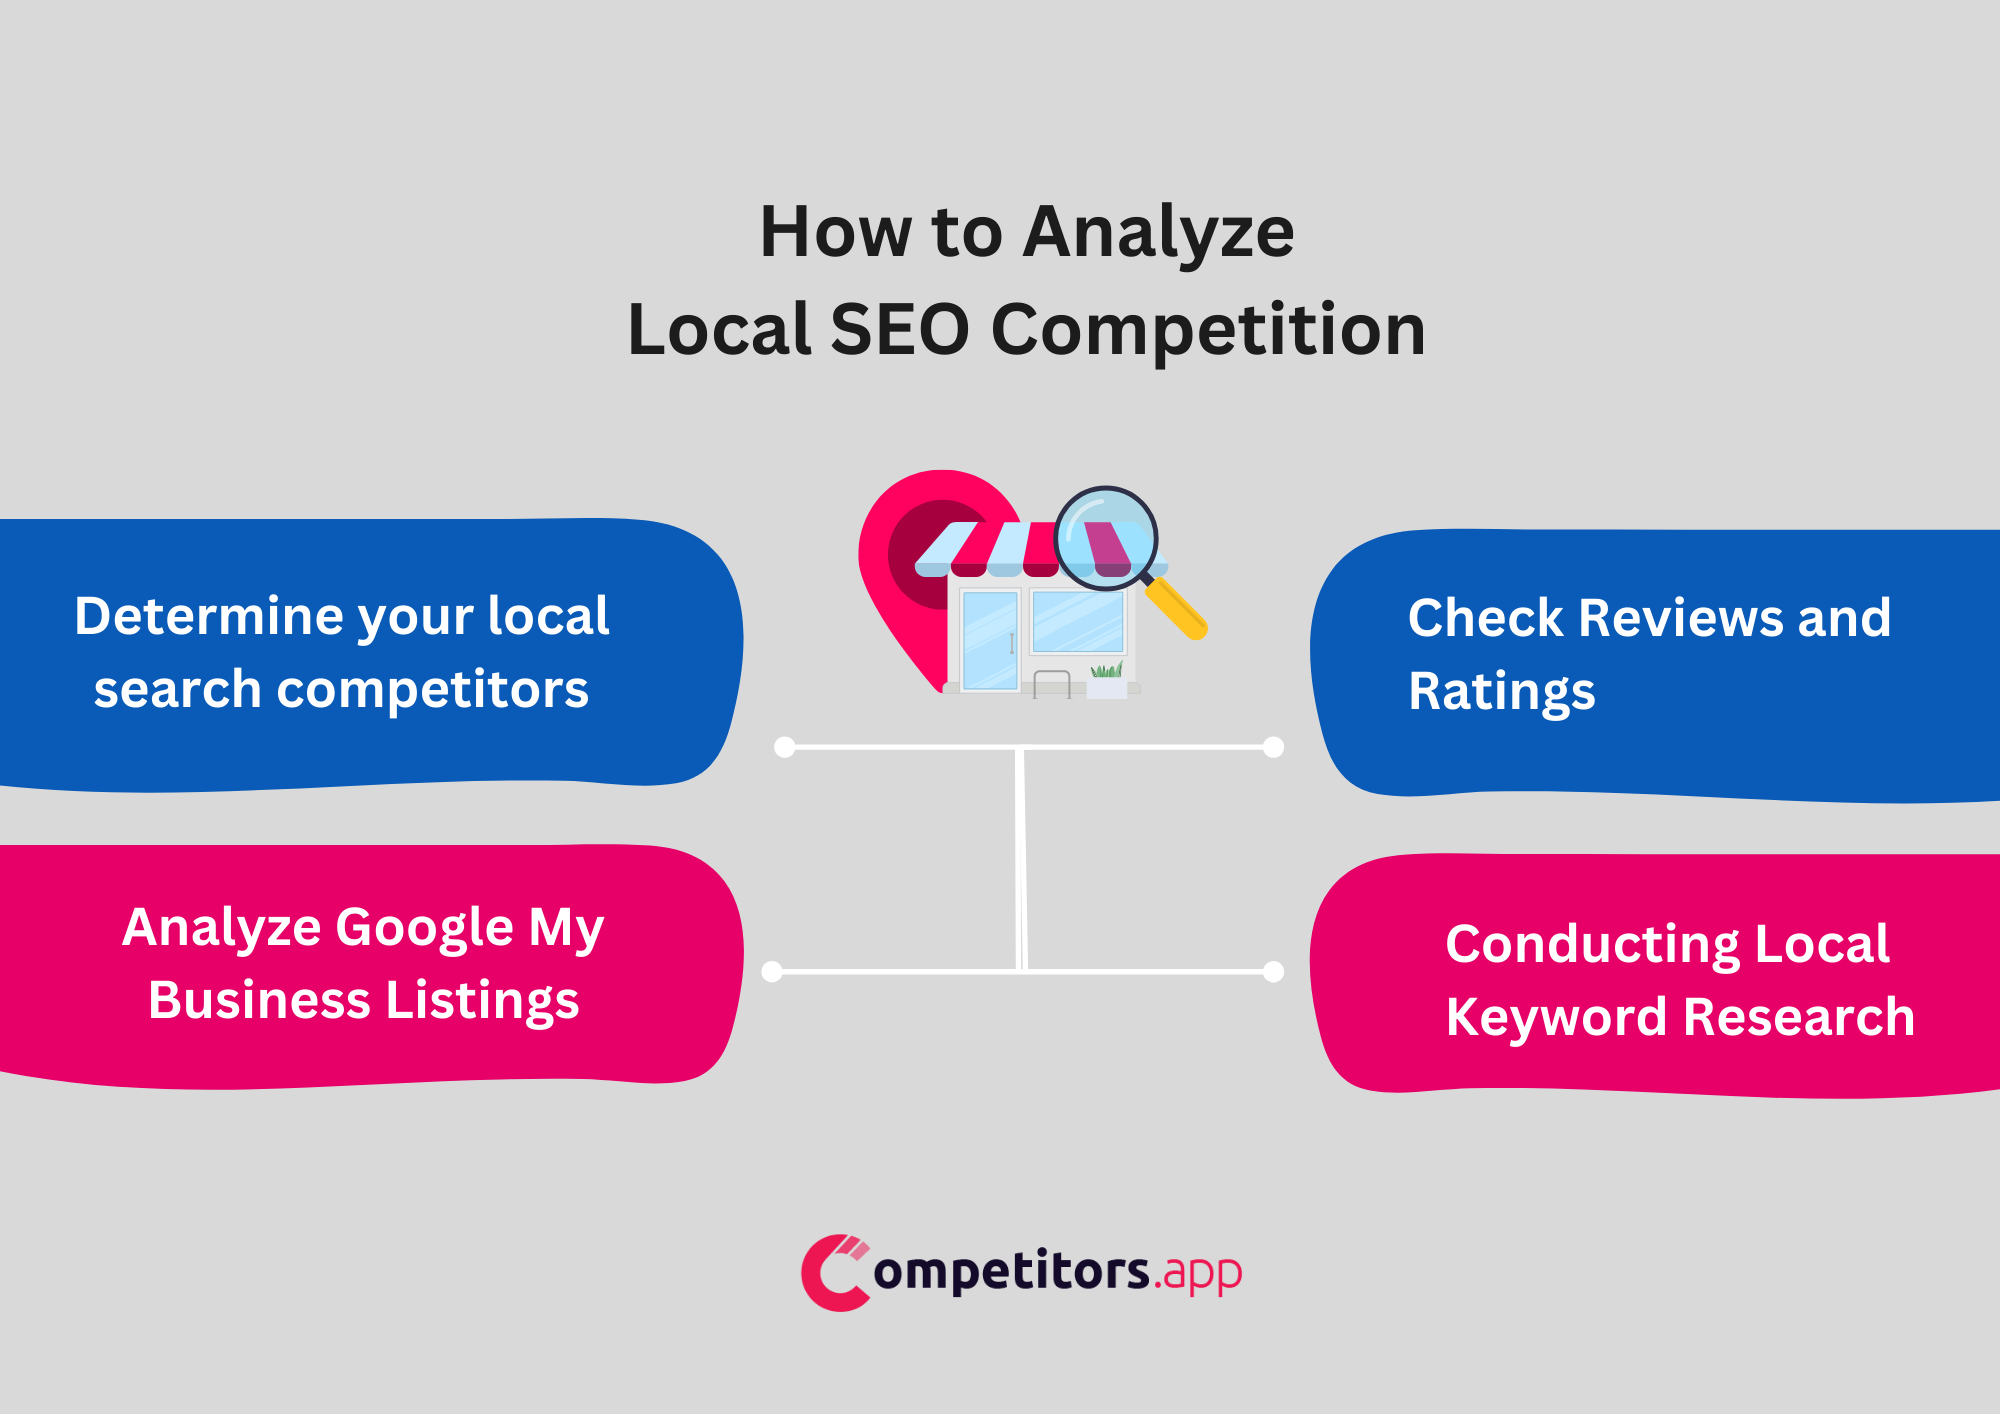 How to Analyze Local SEO Competition